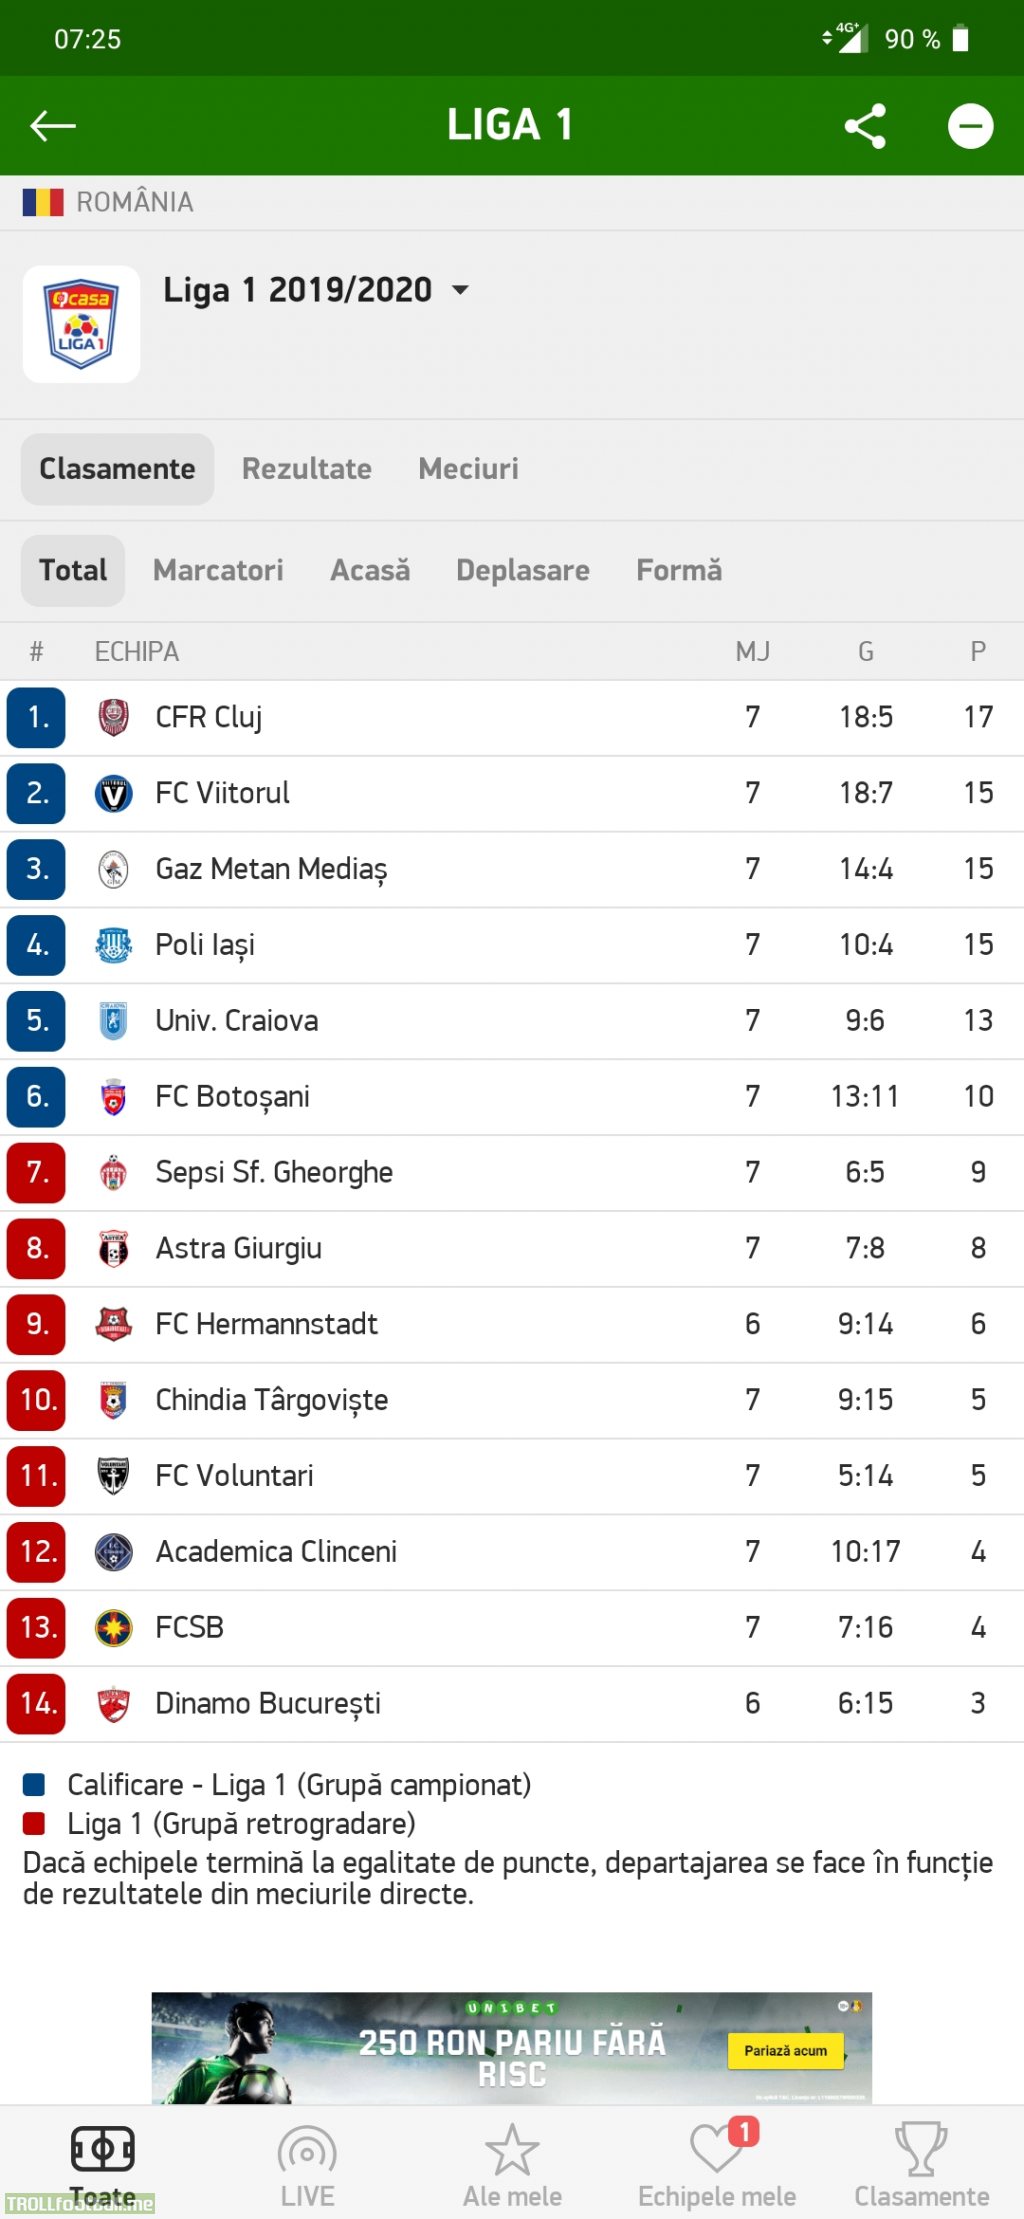 The two most successful teams in romanian football sitting at the bottom of the table